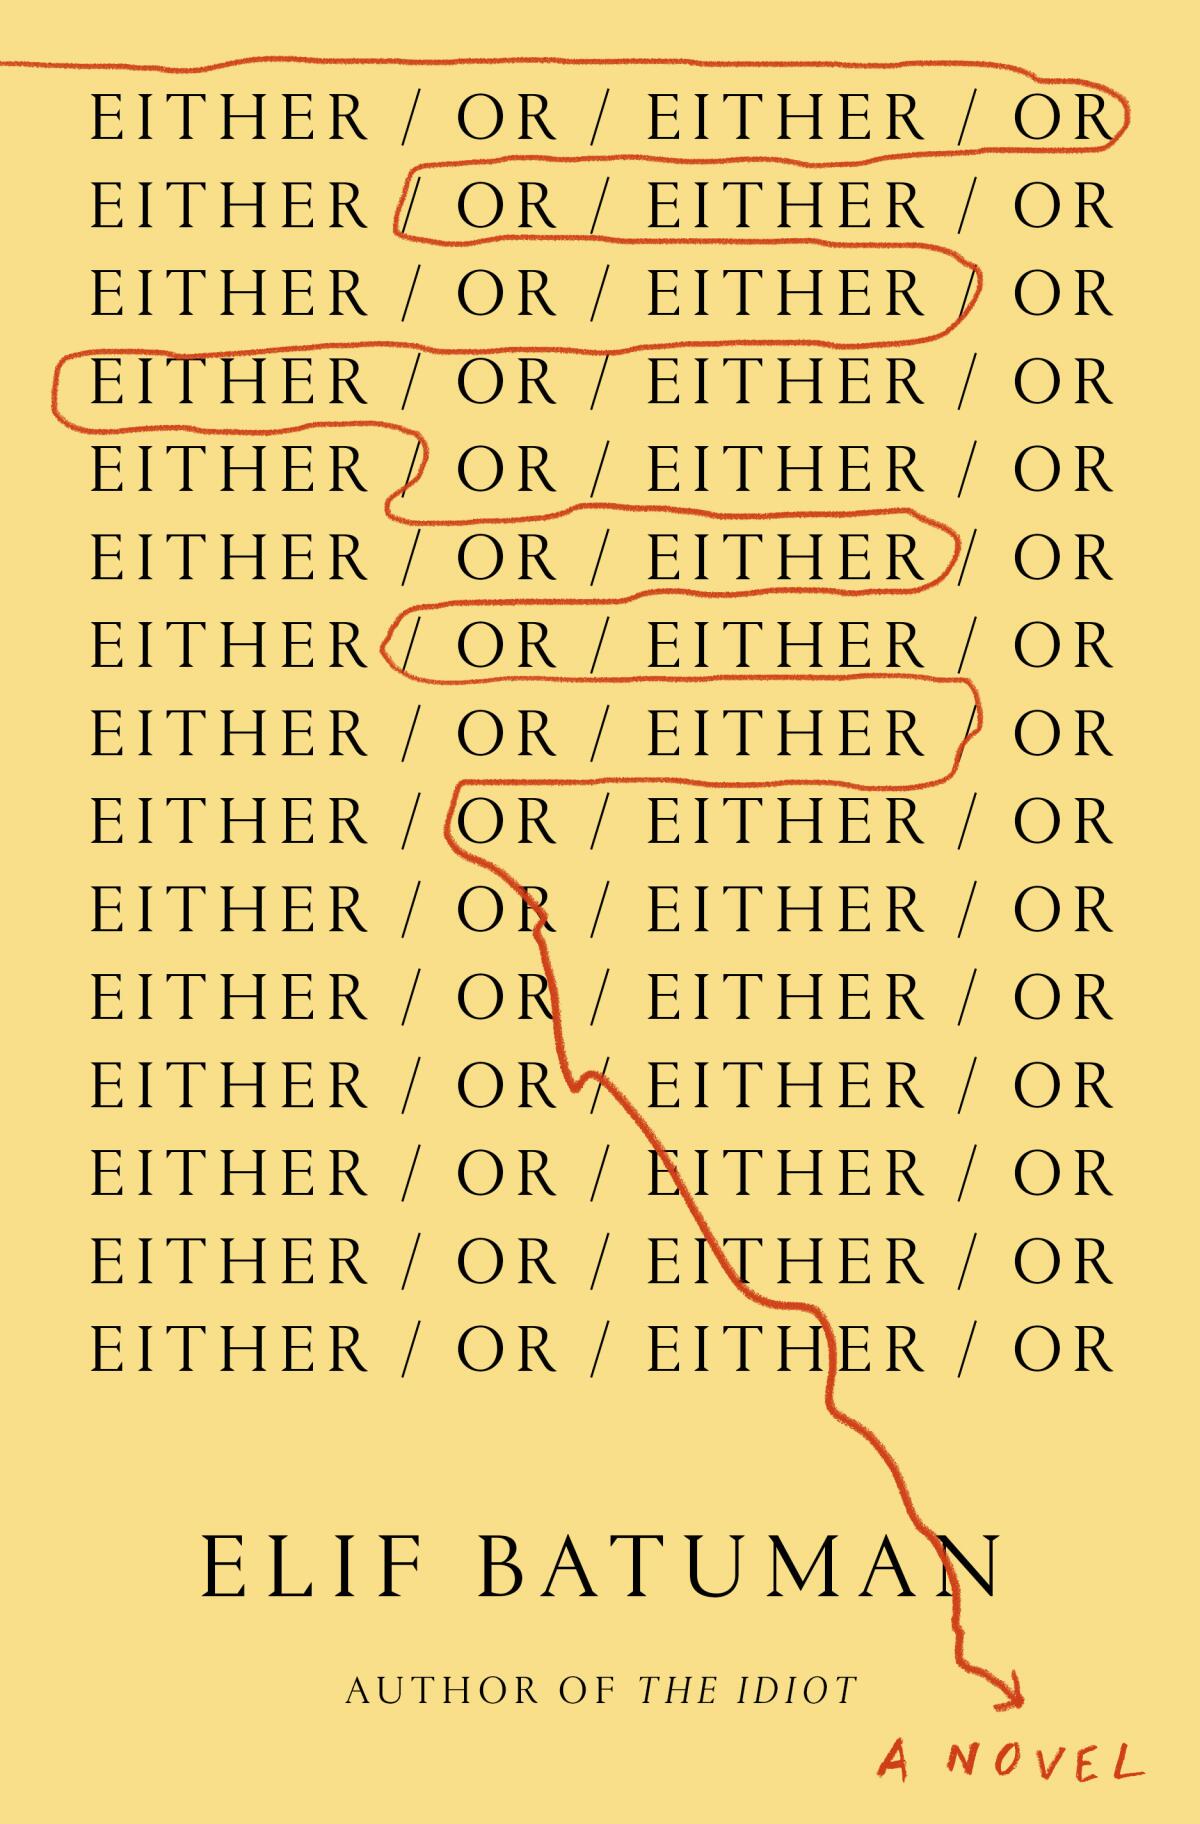 "Either Or" by Elif Batuman